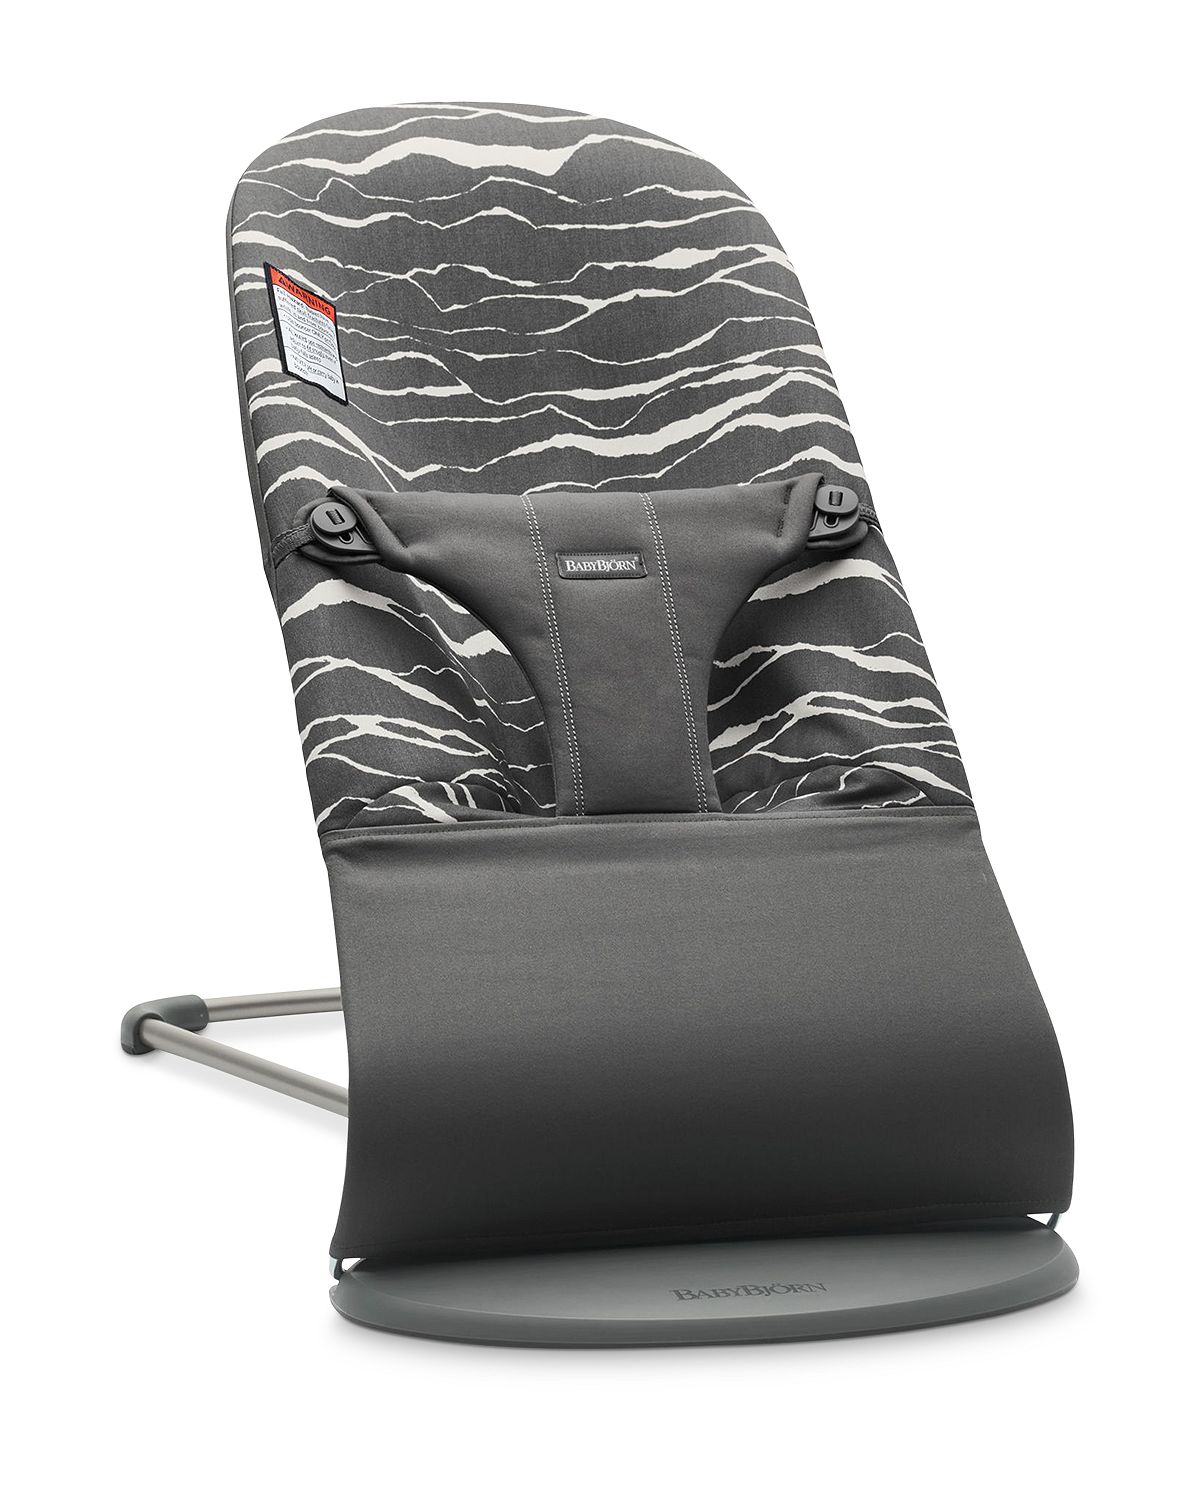 Photo 1 of BabyBjörn Bouncer Bliss, Cotton, Anthracite/Landscape  22"D x 15.5"W x 31"H

